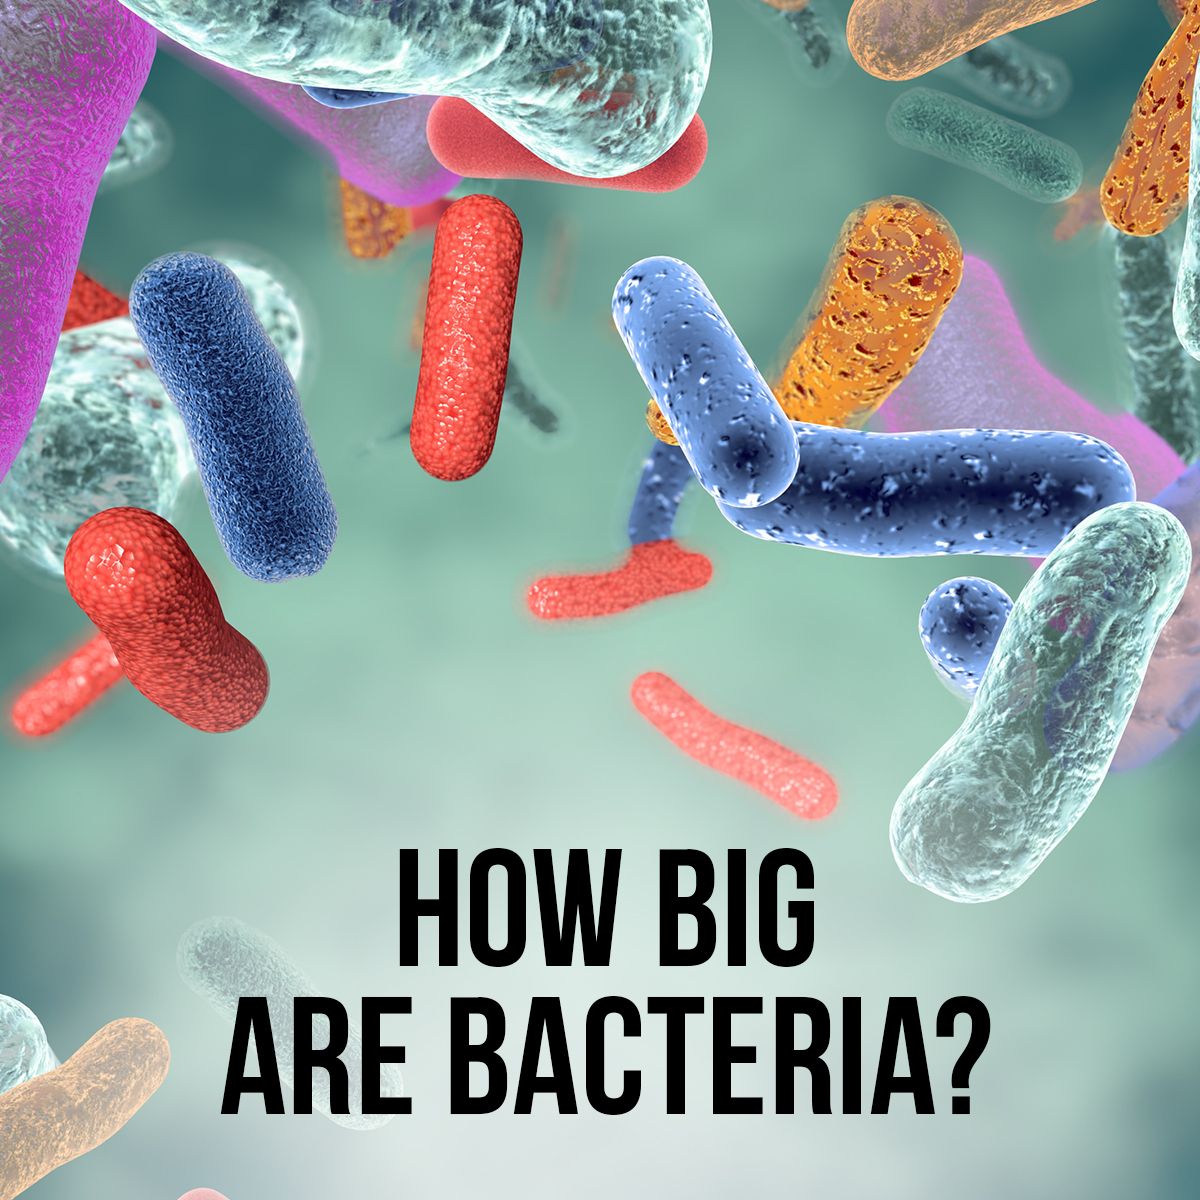 How Big Are Bacteria?